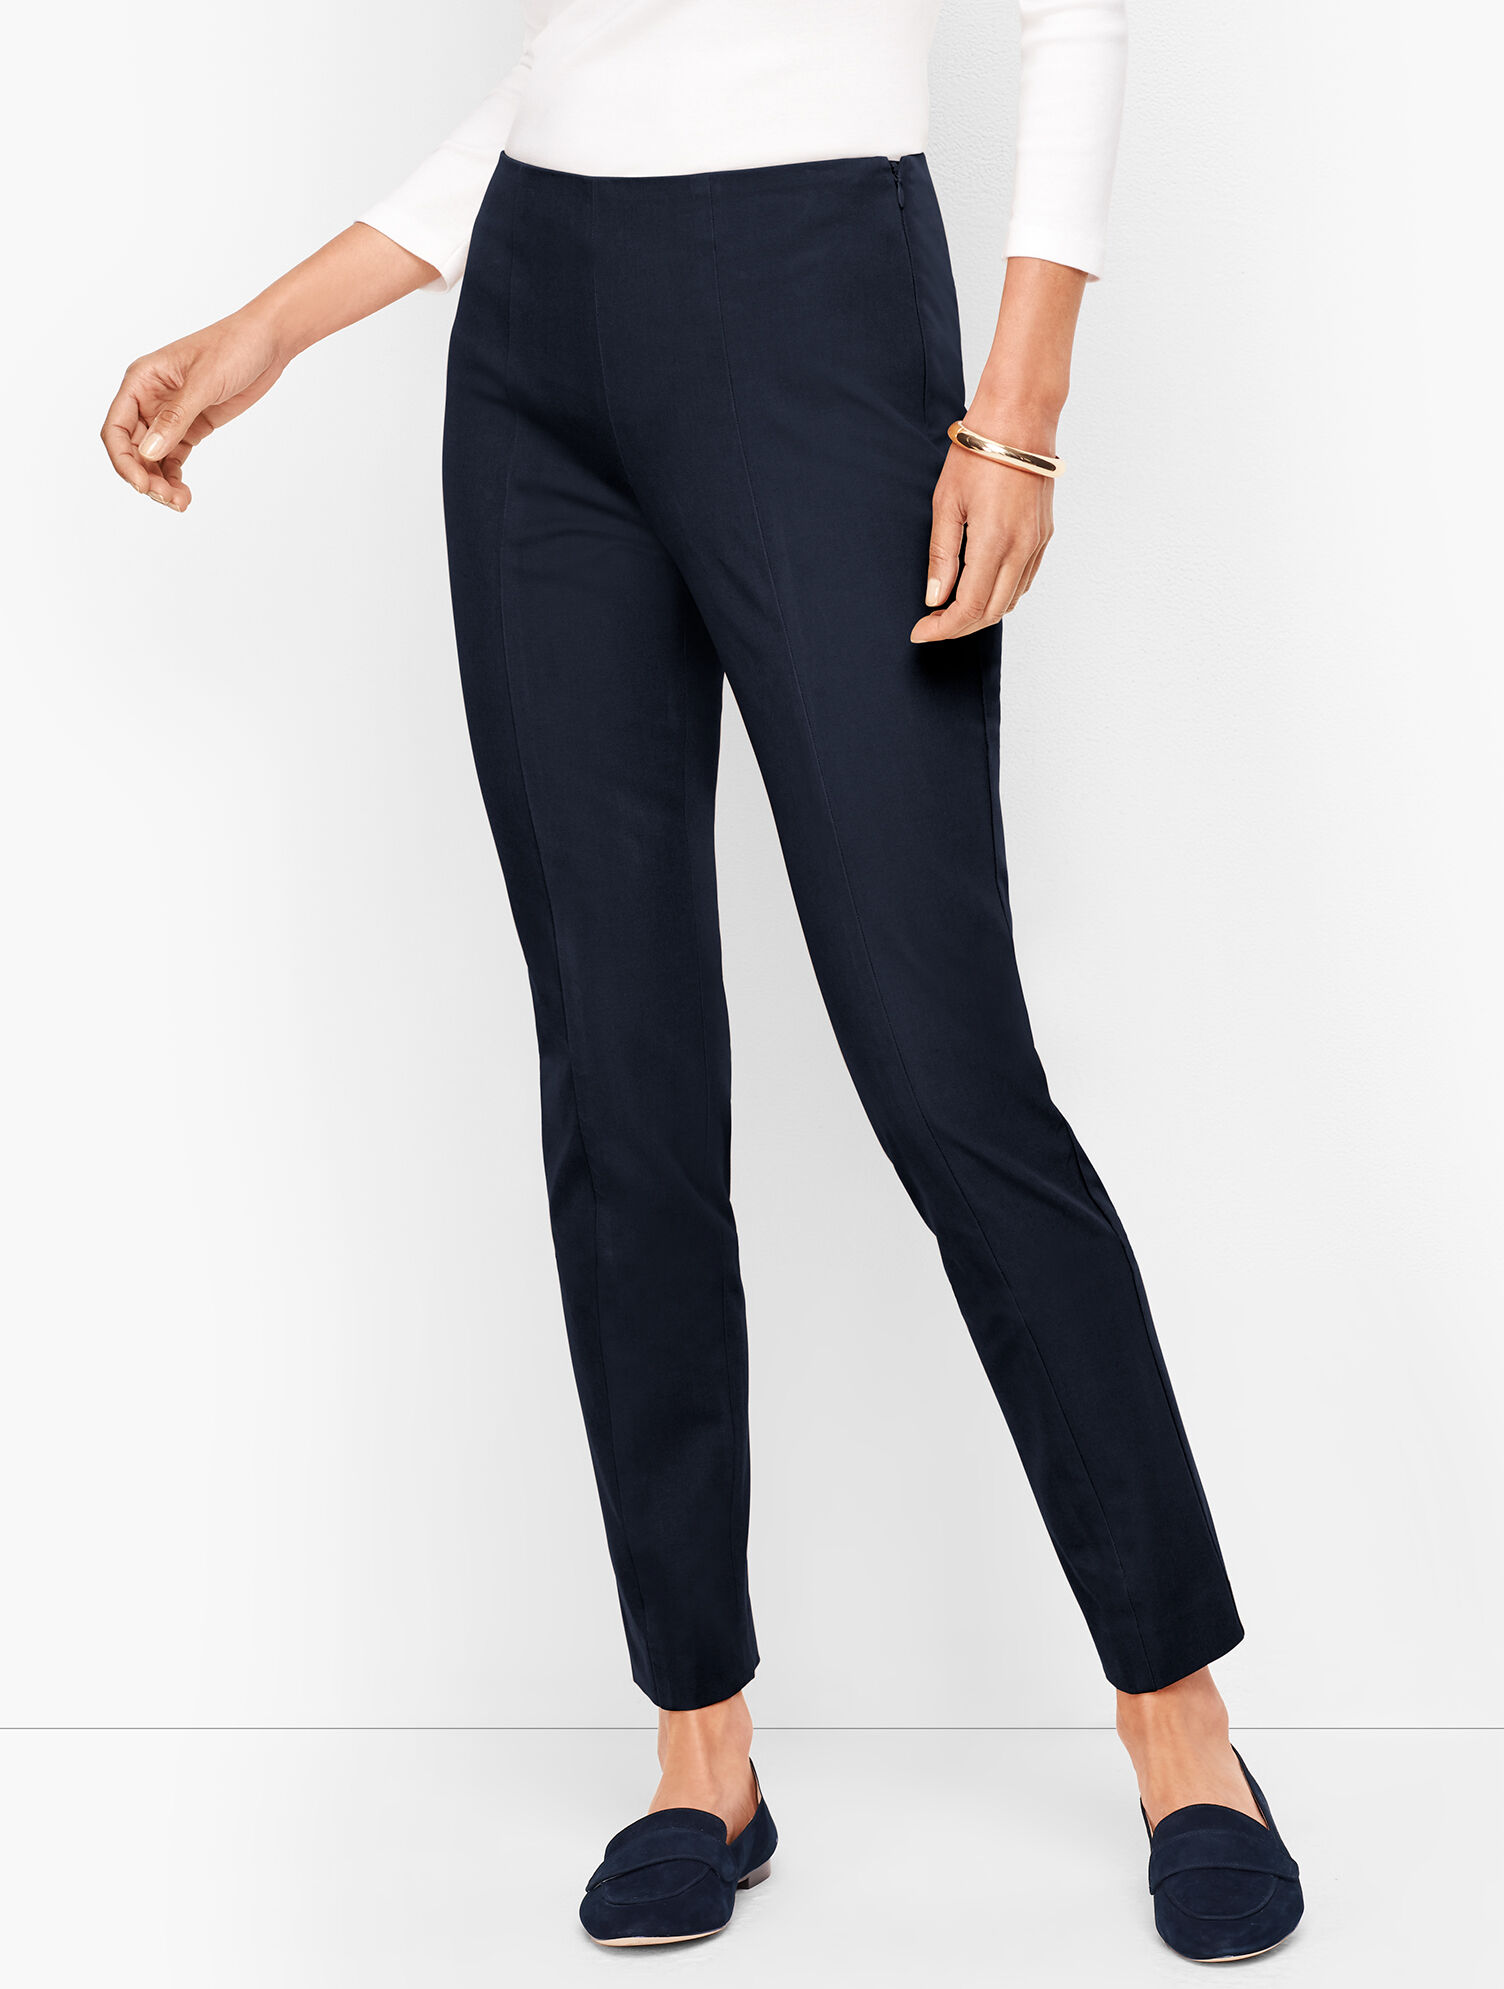 Talbots Chatham Ankle Pants - Front & Back Stitched Seam